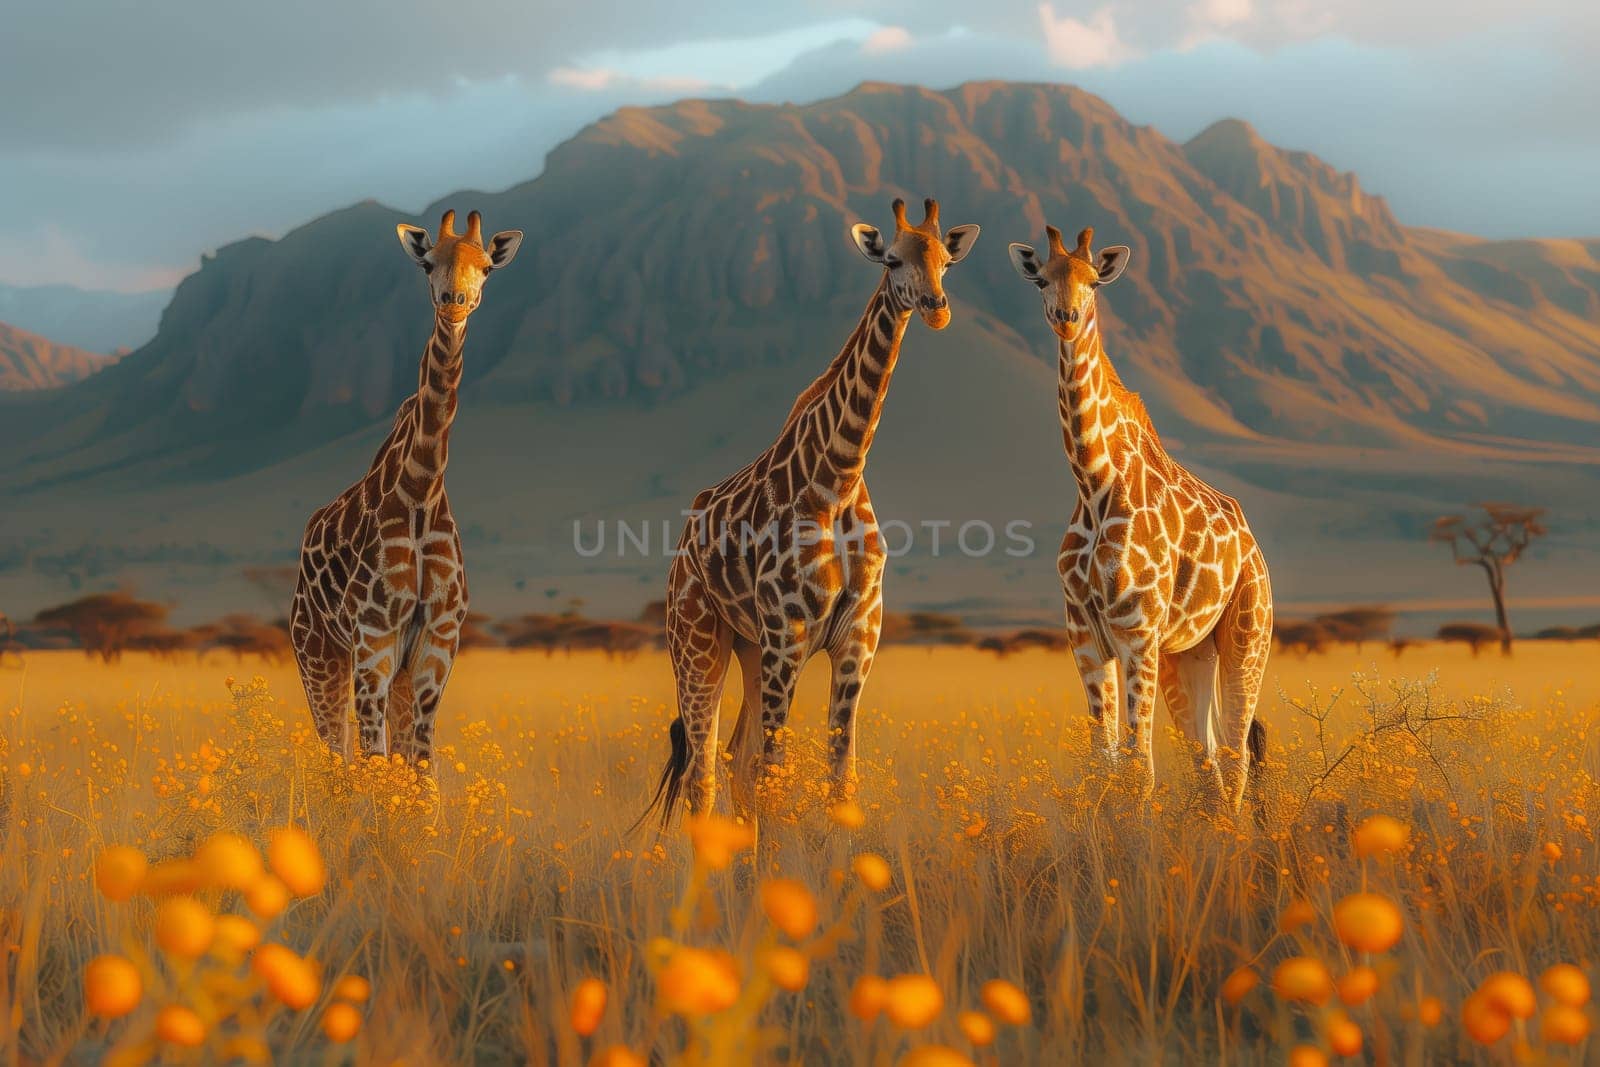 A group of three Giraffidae standing in a field of flowers with mountains in the background, under a clear sky with fluffy clouds